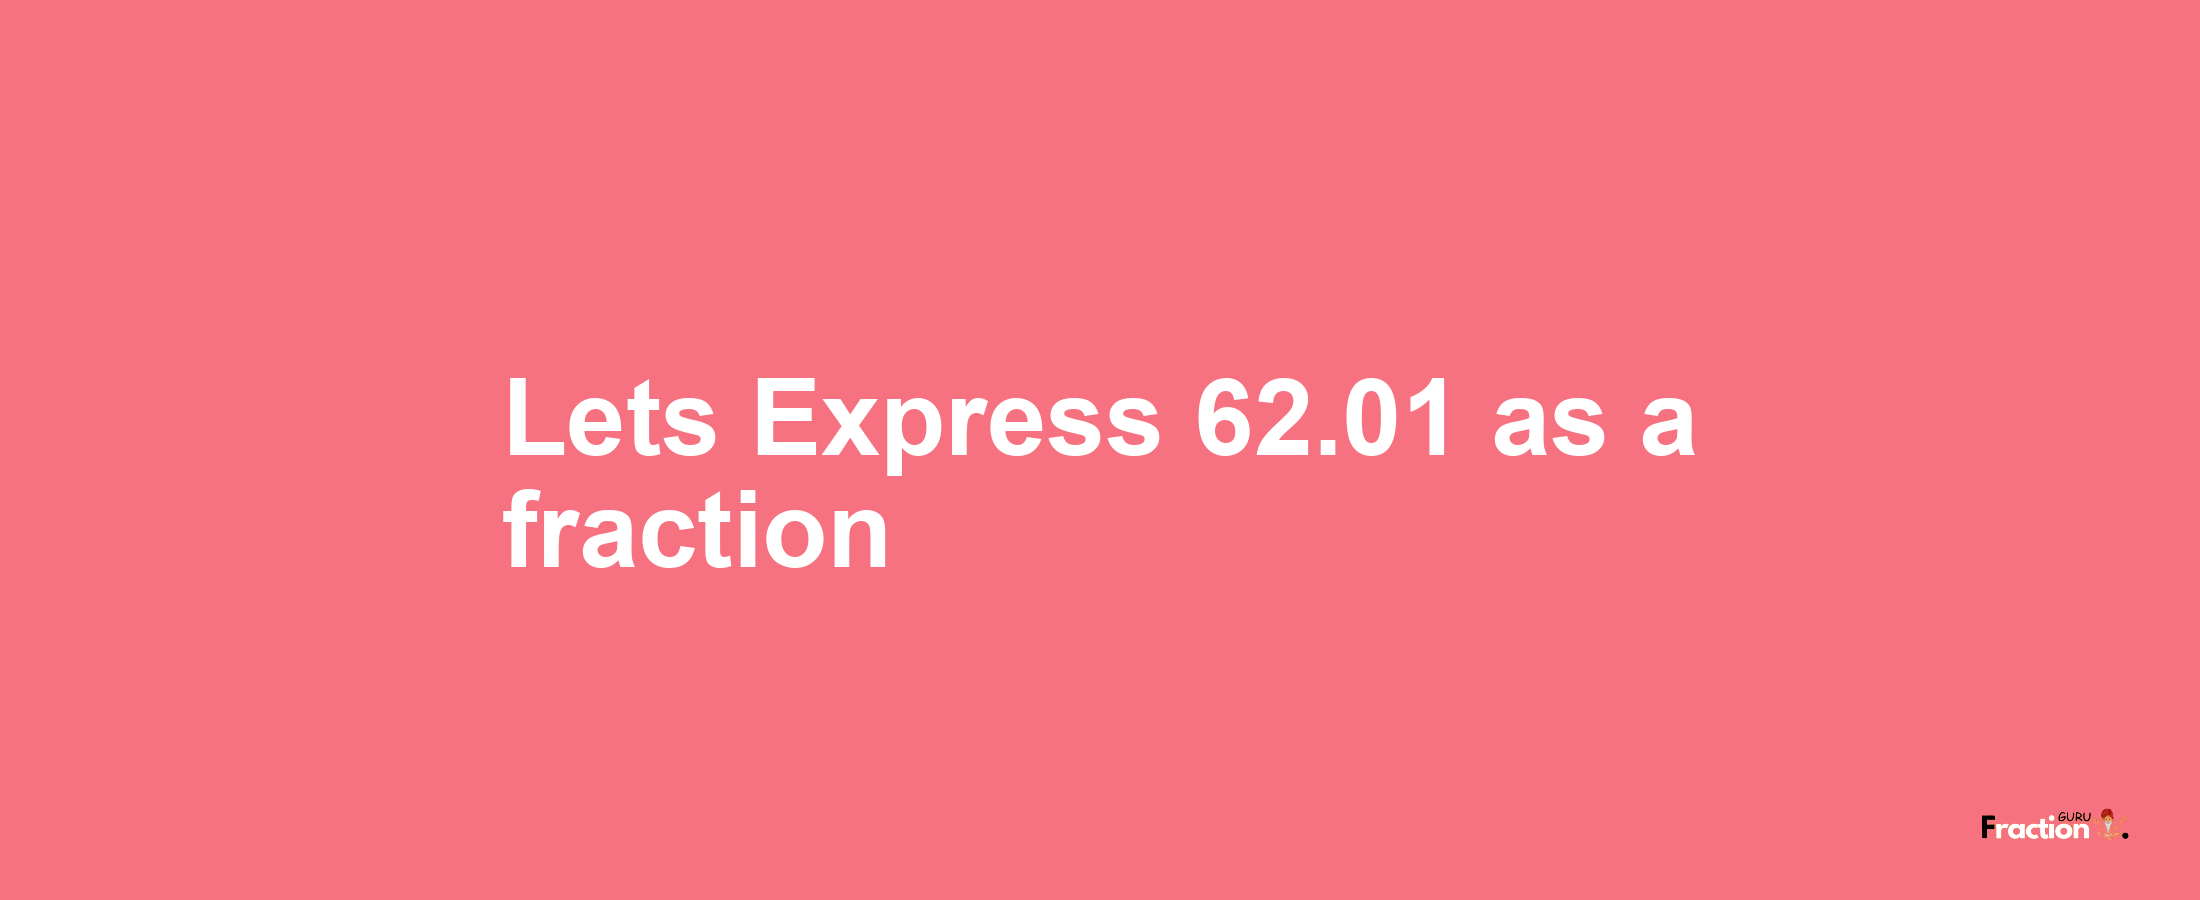 Lets Express 62.01 as afraction